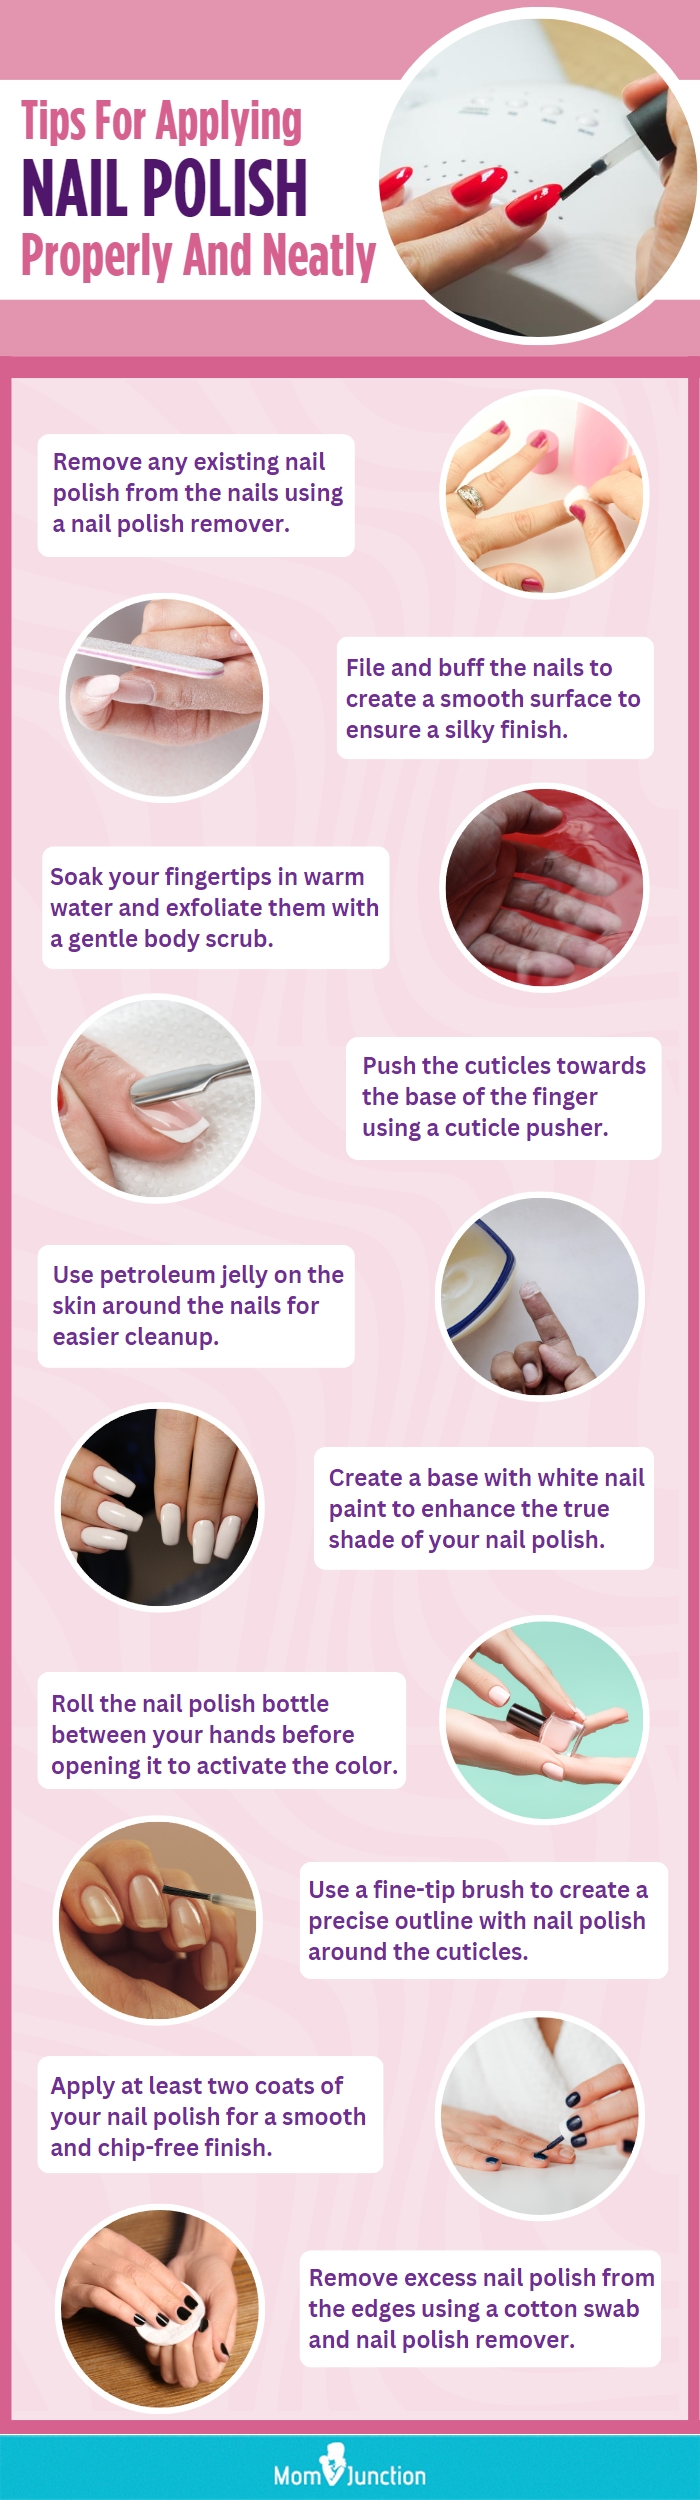 Tips For Applying Nail Polish Properly And Neatly (infographic)